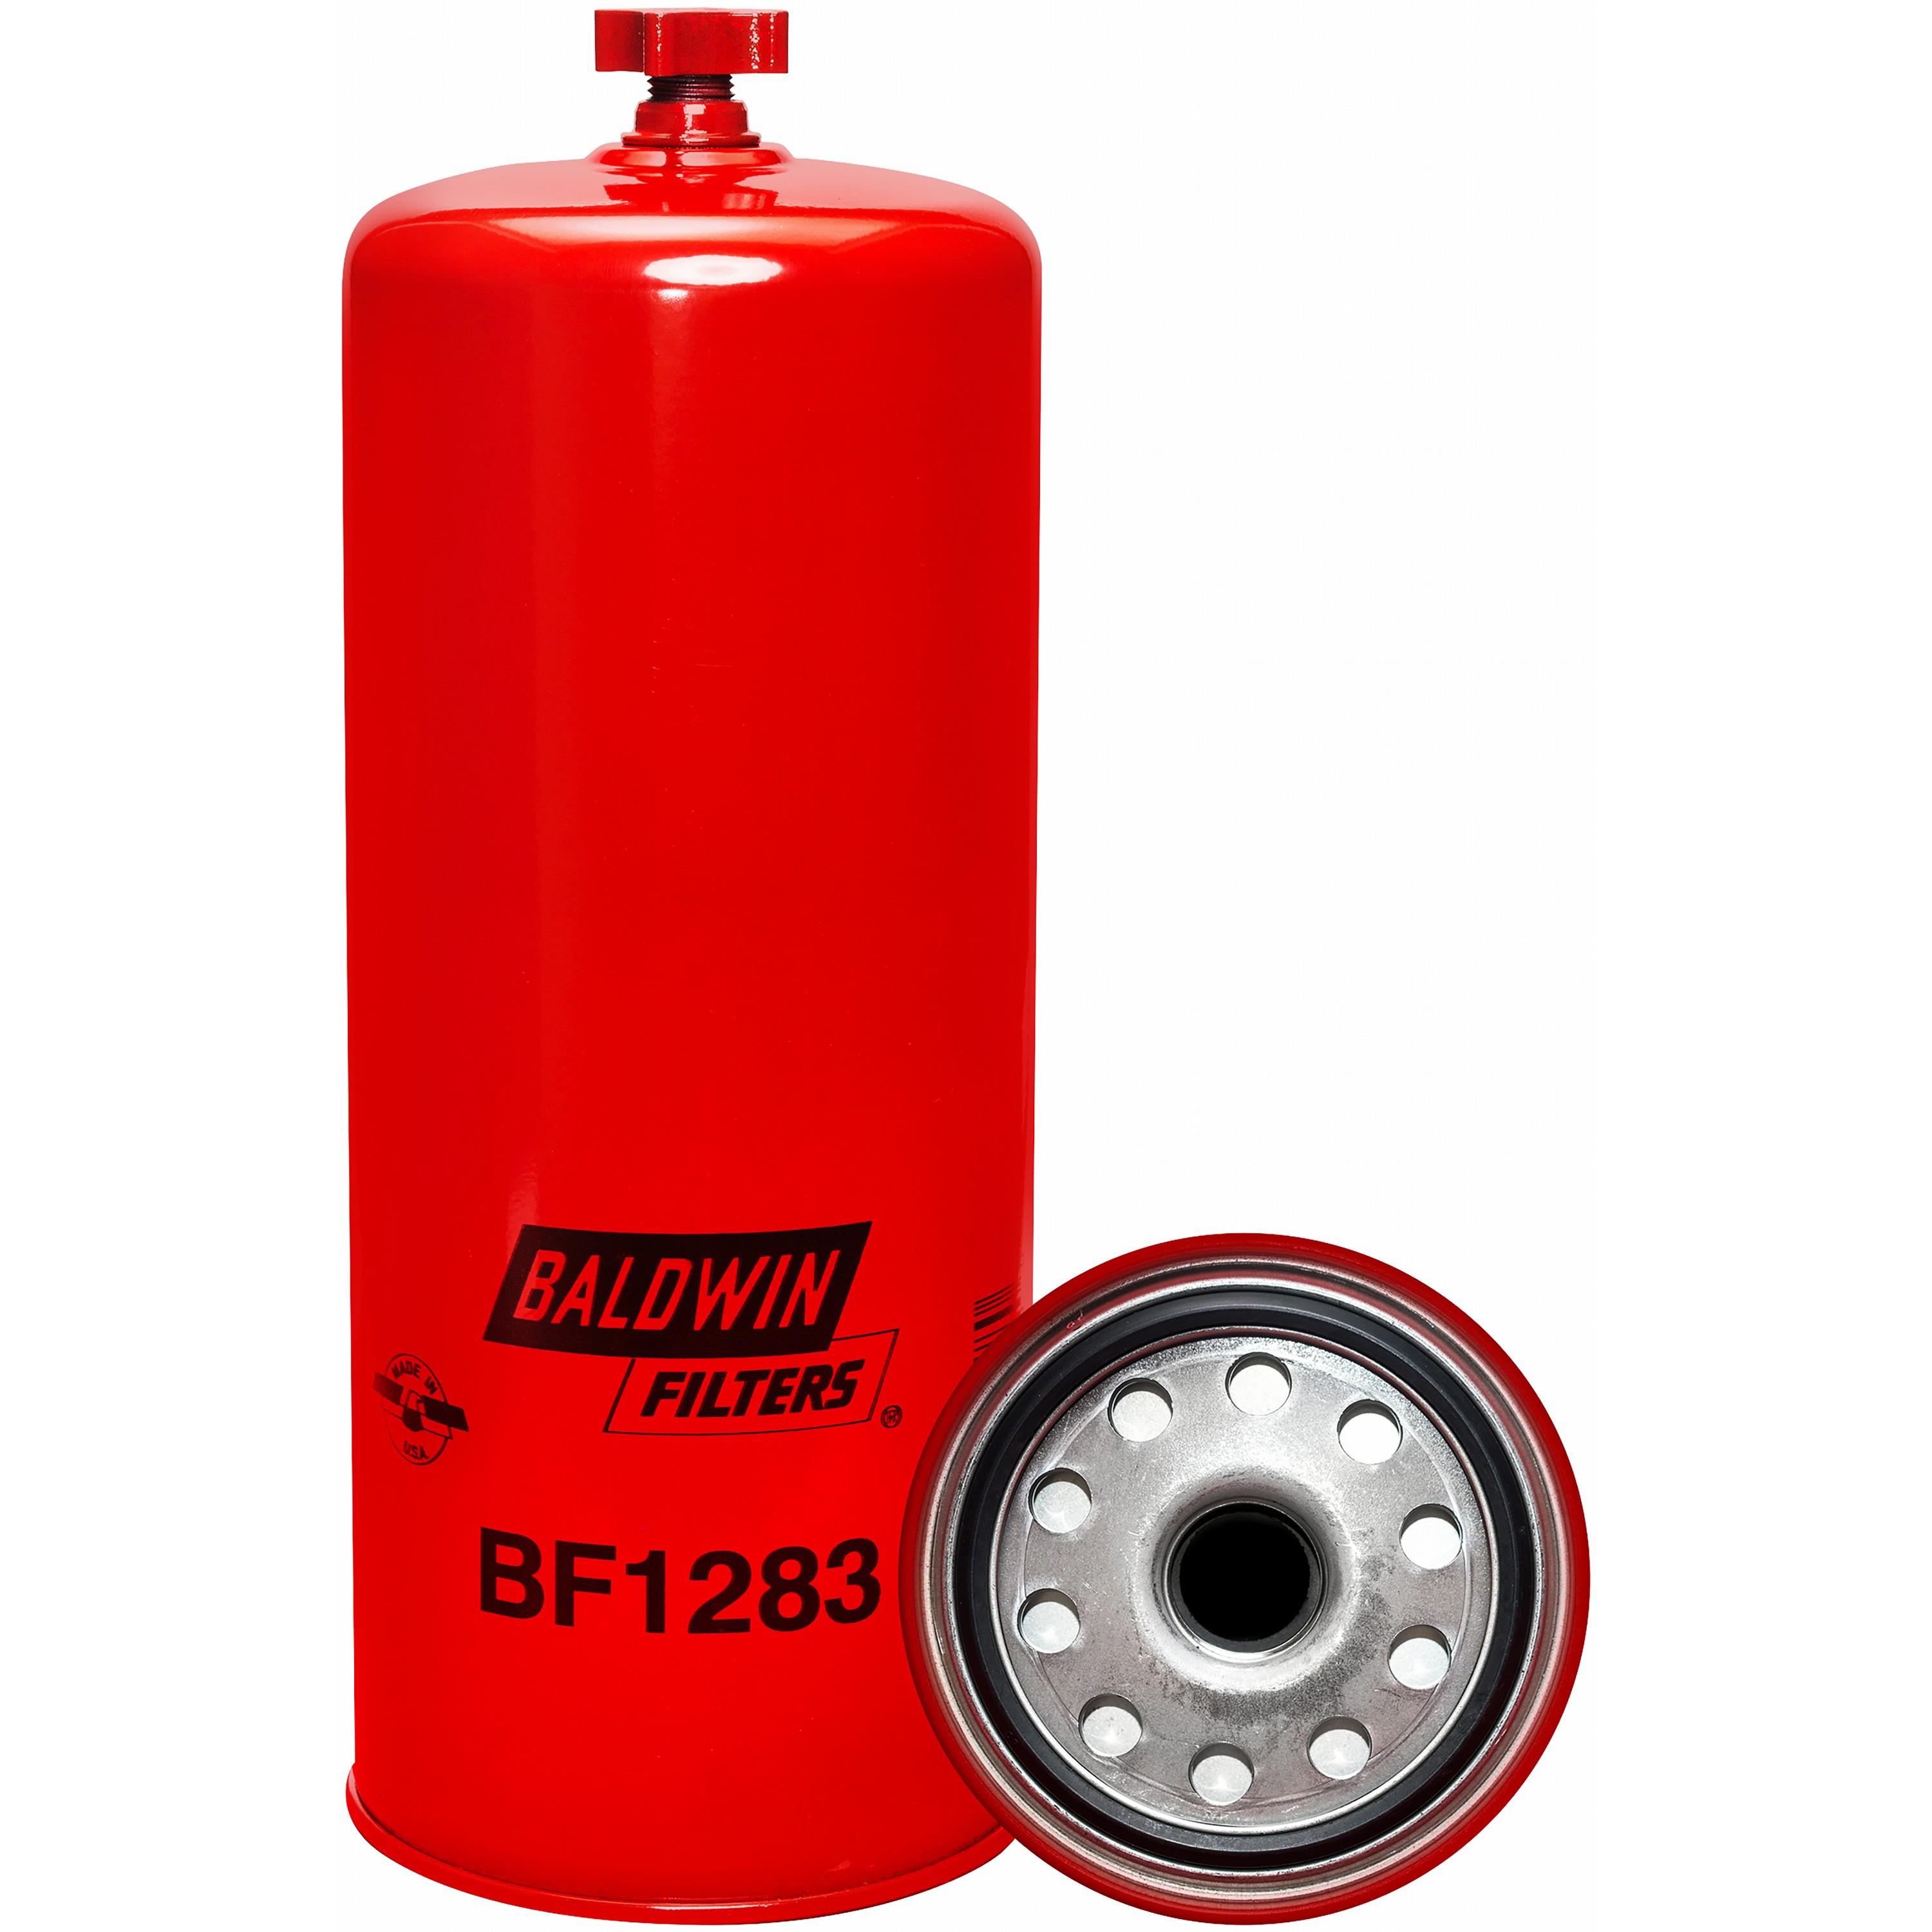  Baldwin  Fuel Filter  Spin On